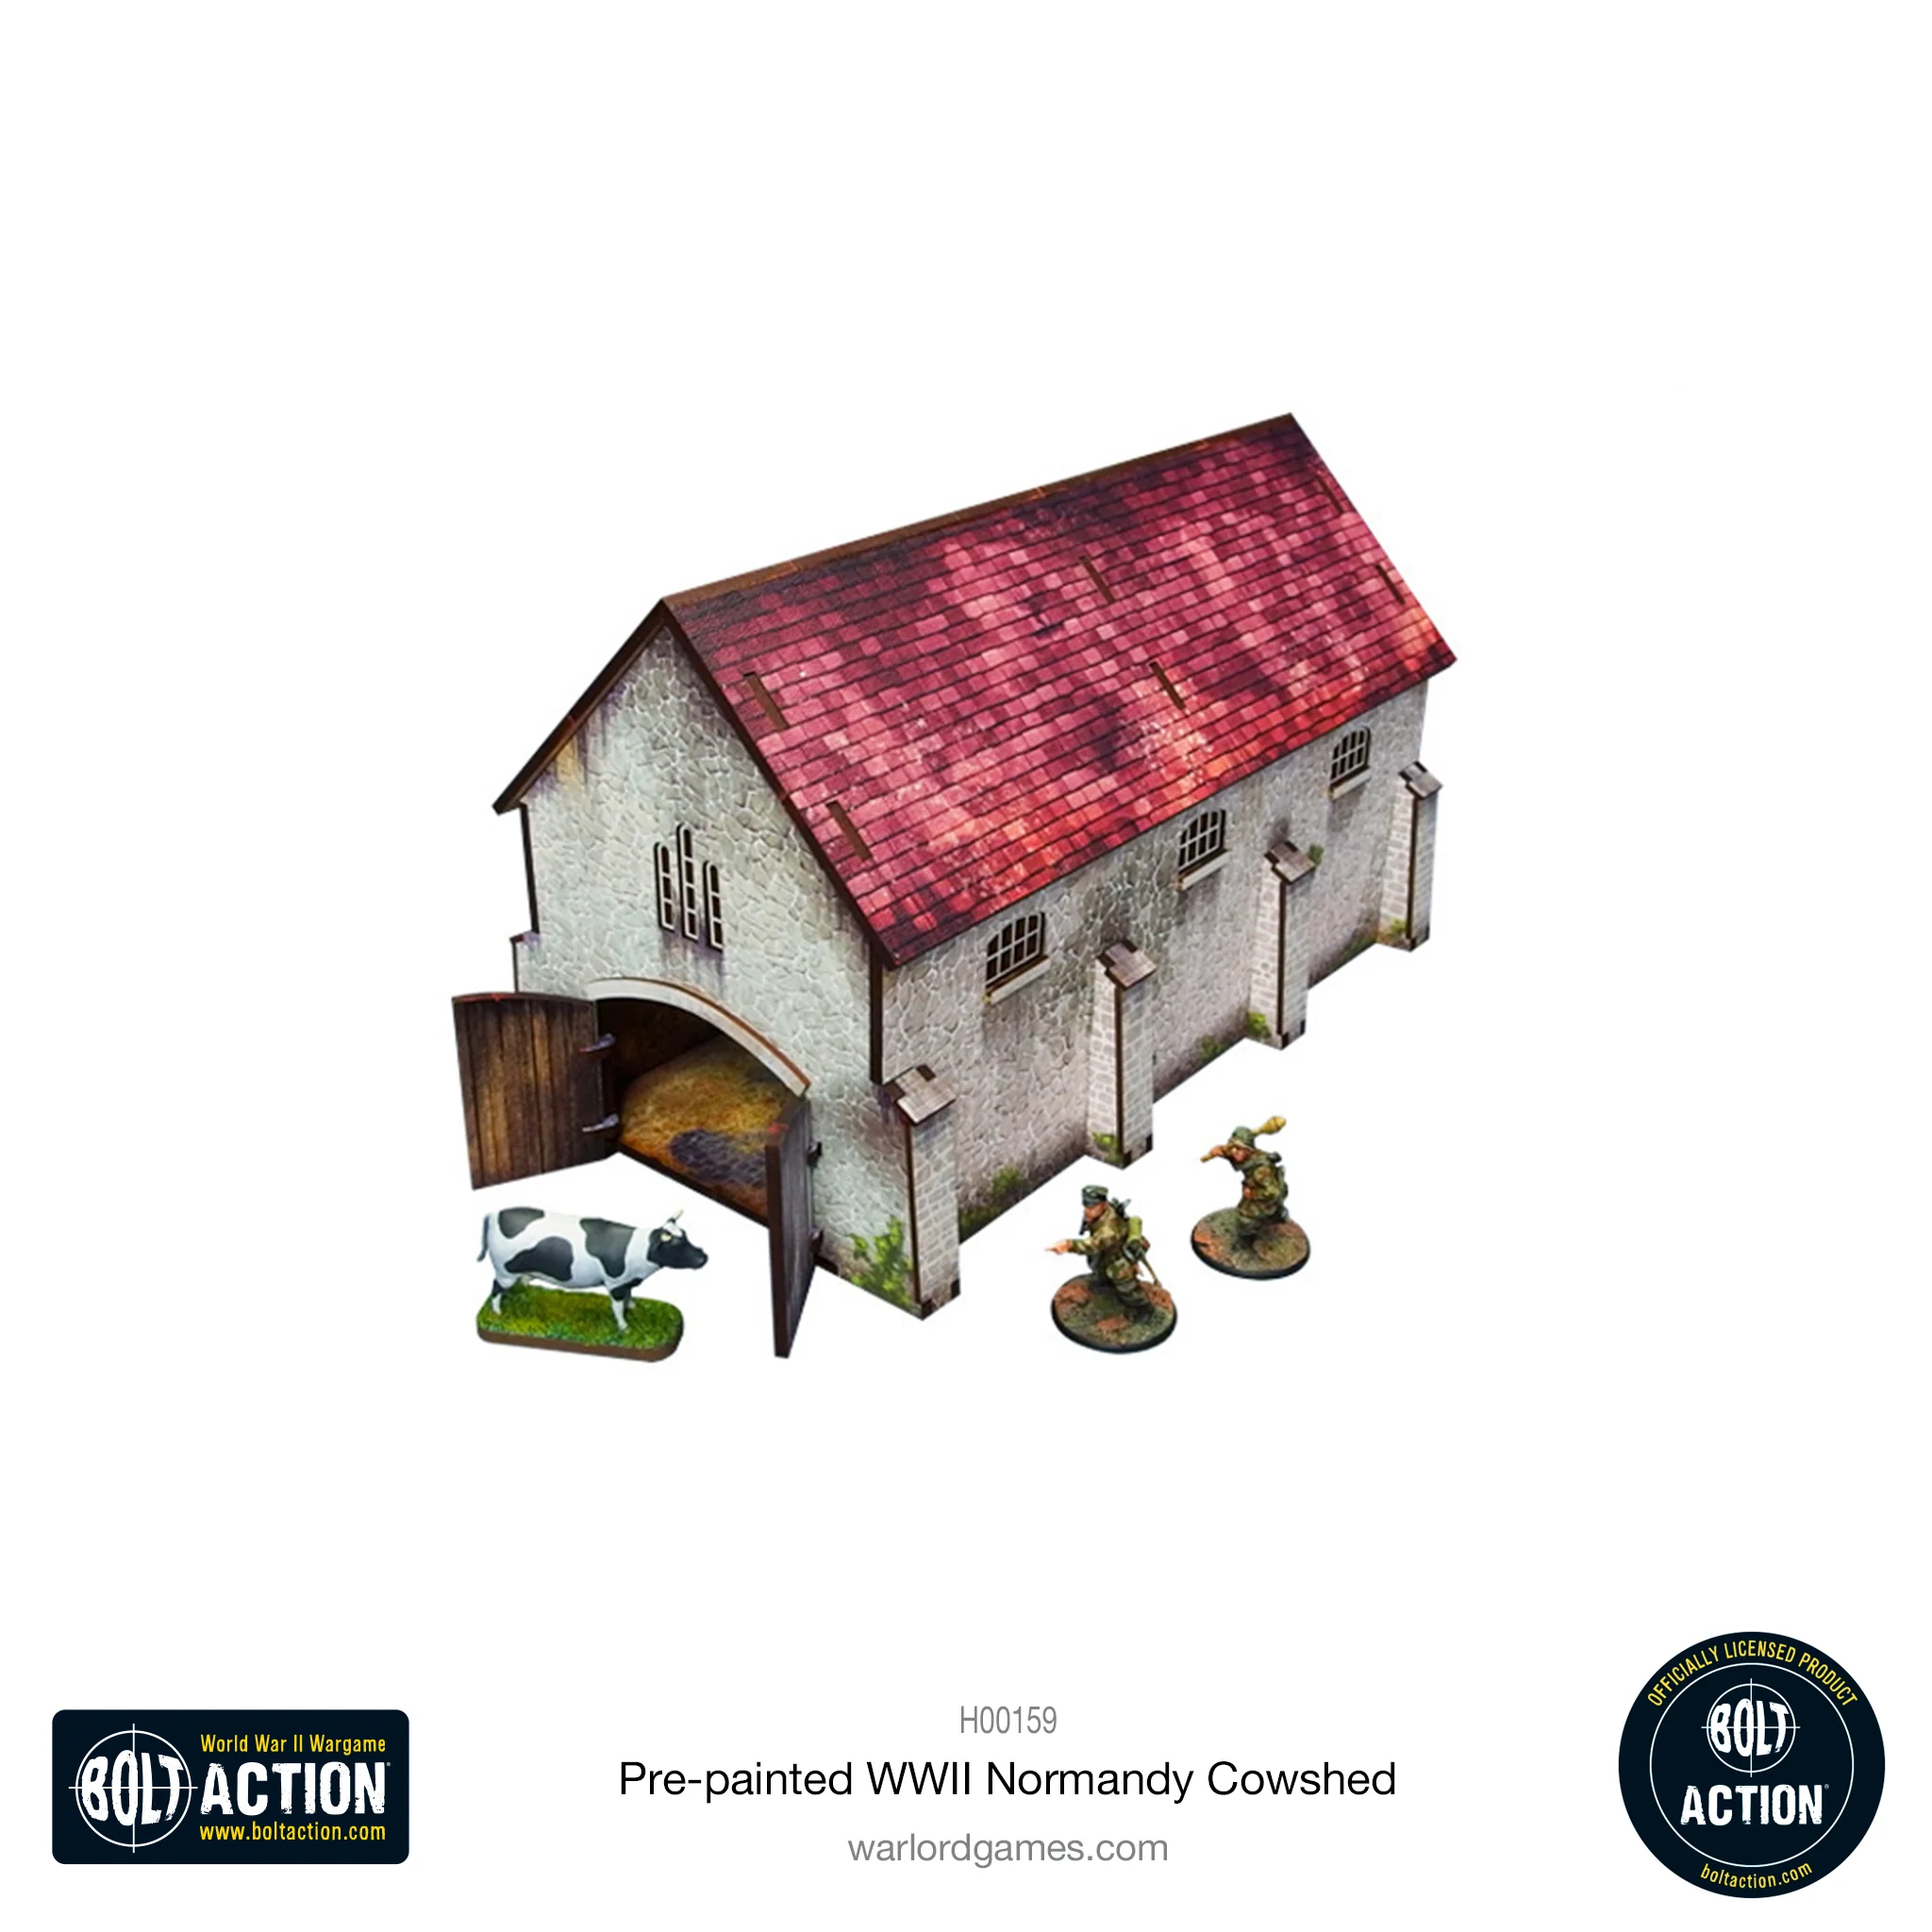 Bolt Action: Pre-painted WWII Normandy Cowshed-1711116071-PeXjo.webp